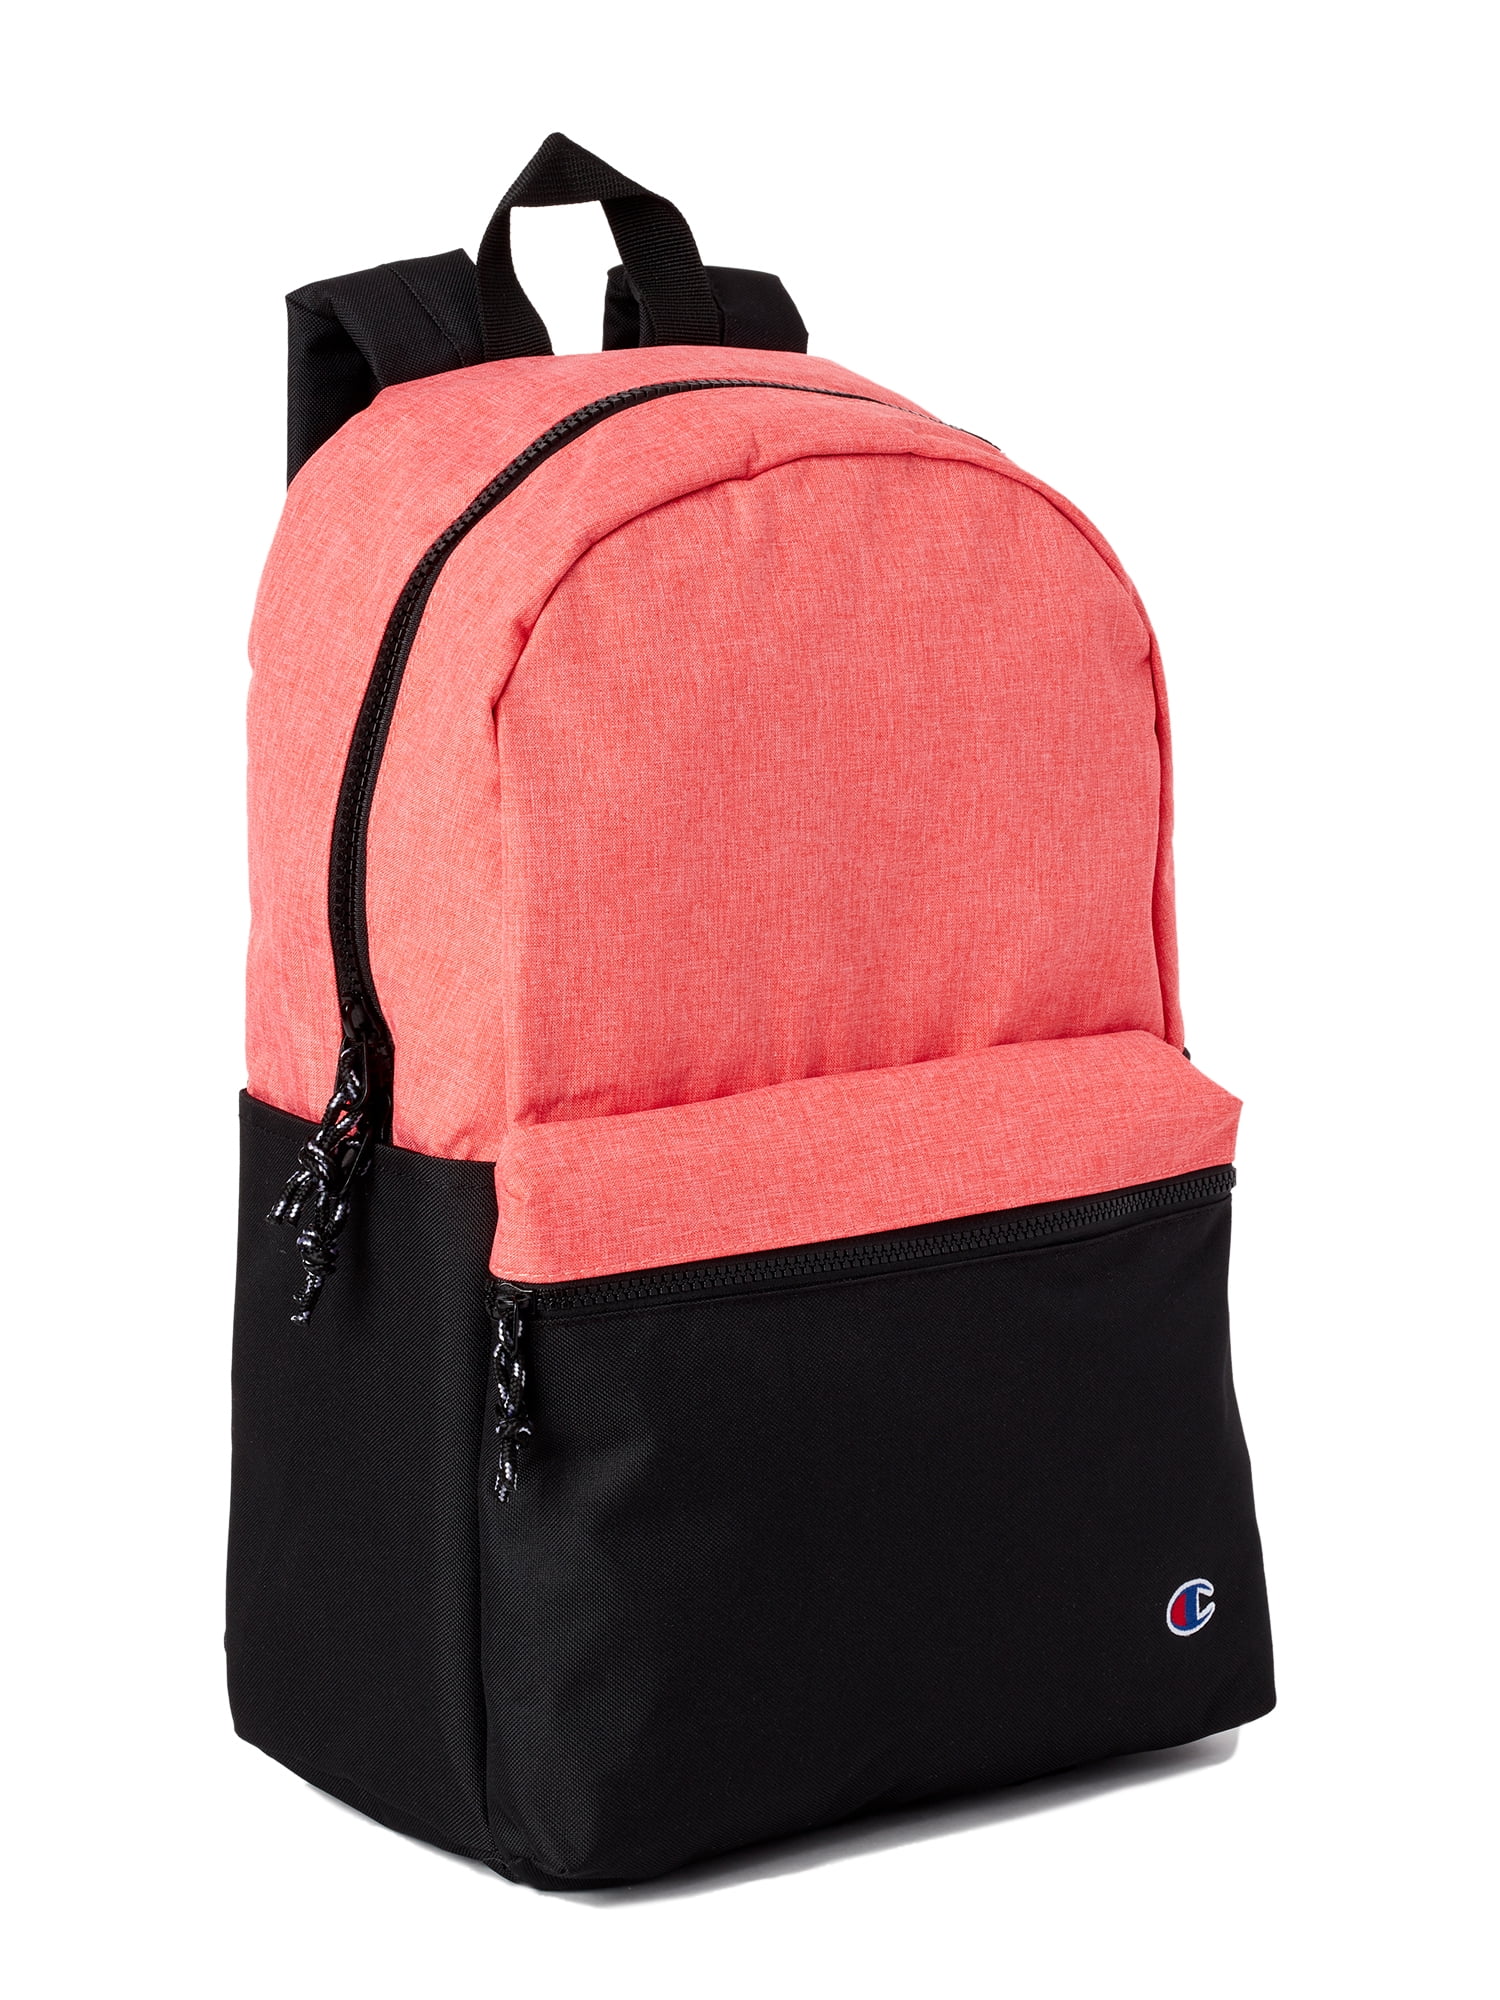 champion pink backpack